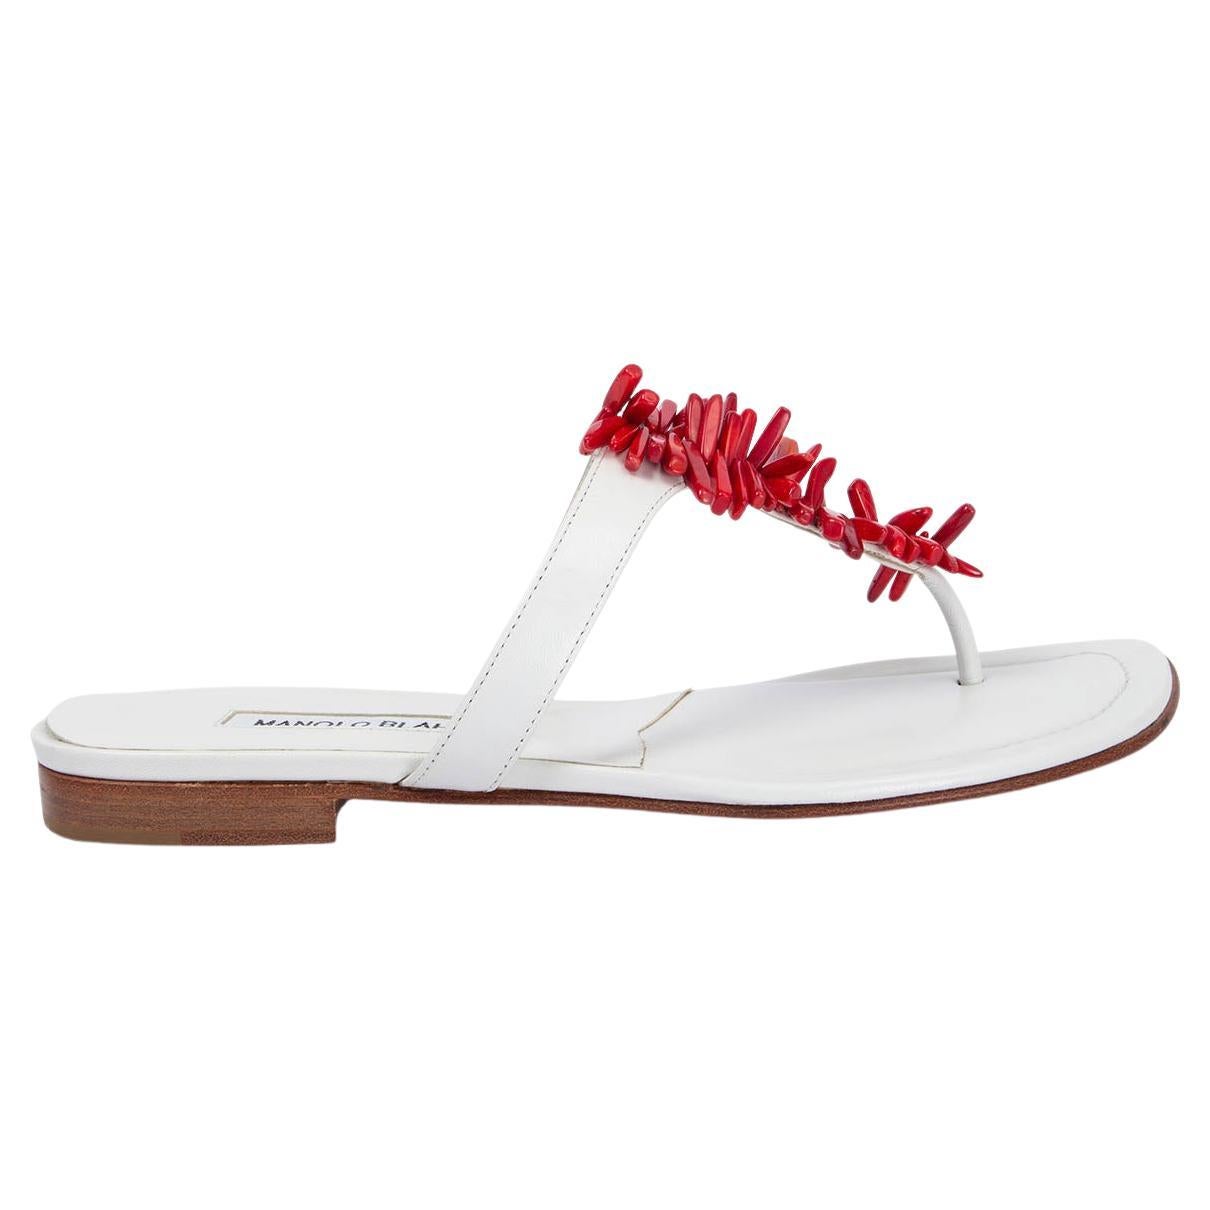 MANOLO BLAHNIK white leather CORAL BEADED Flat Thong Sandals Shoes 36.5 For Sale